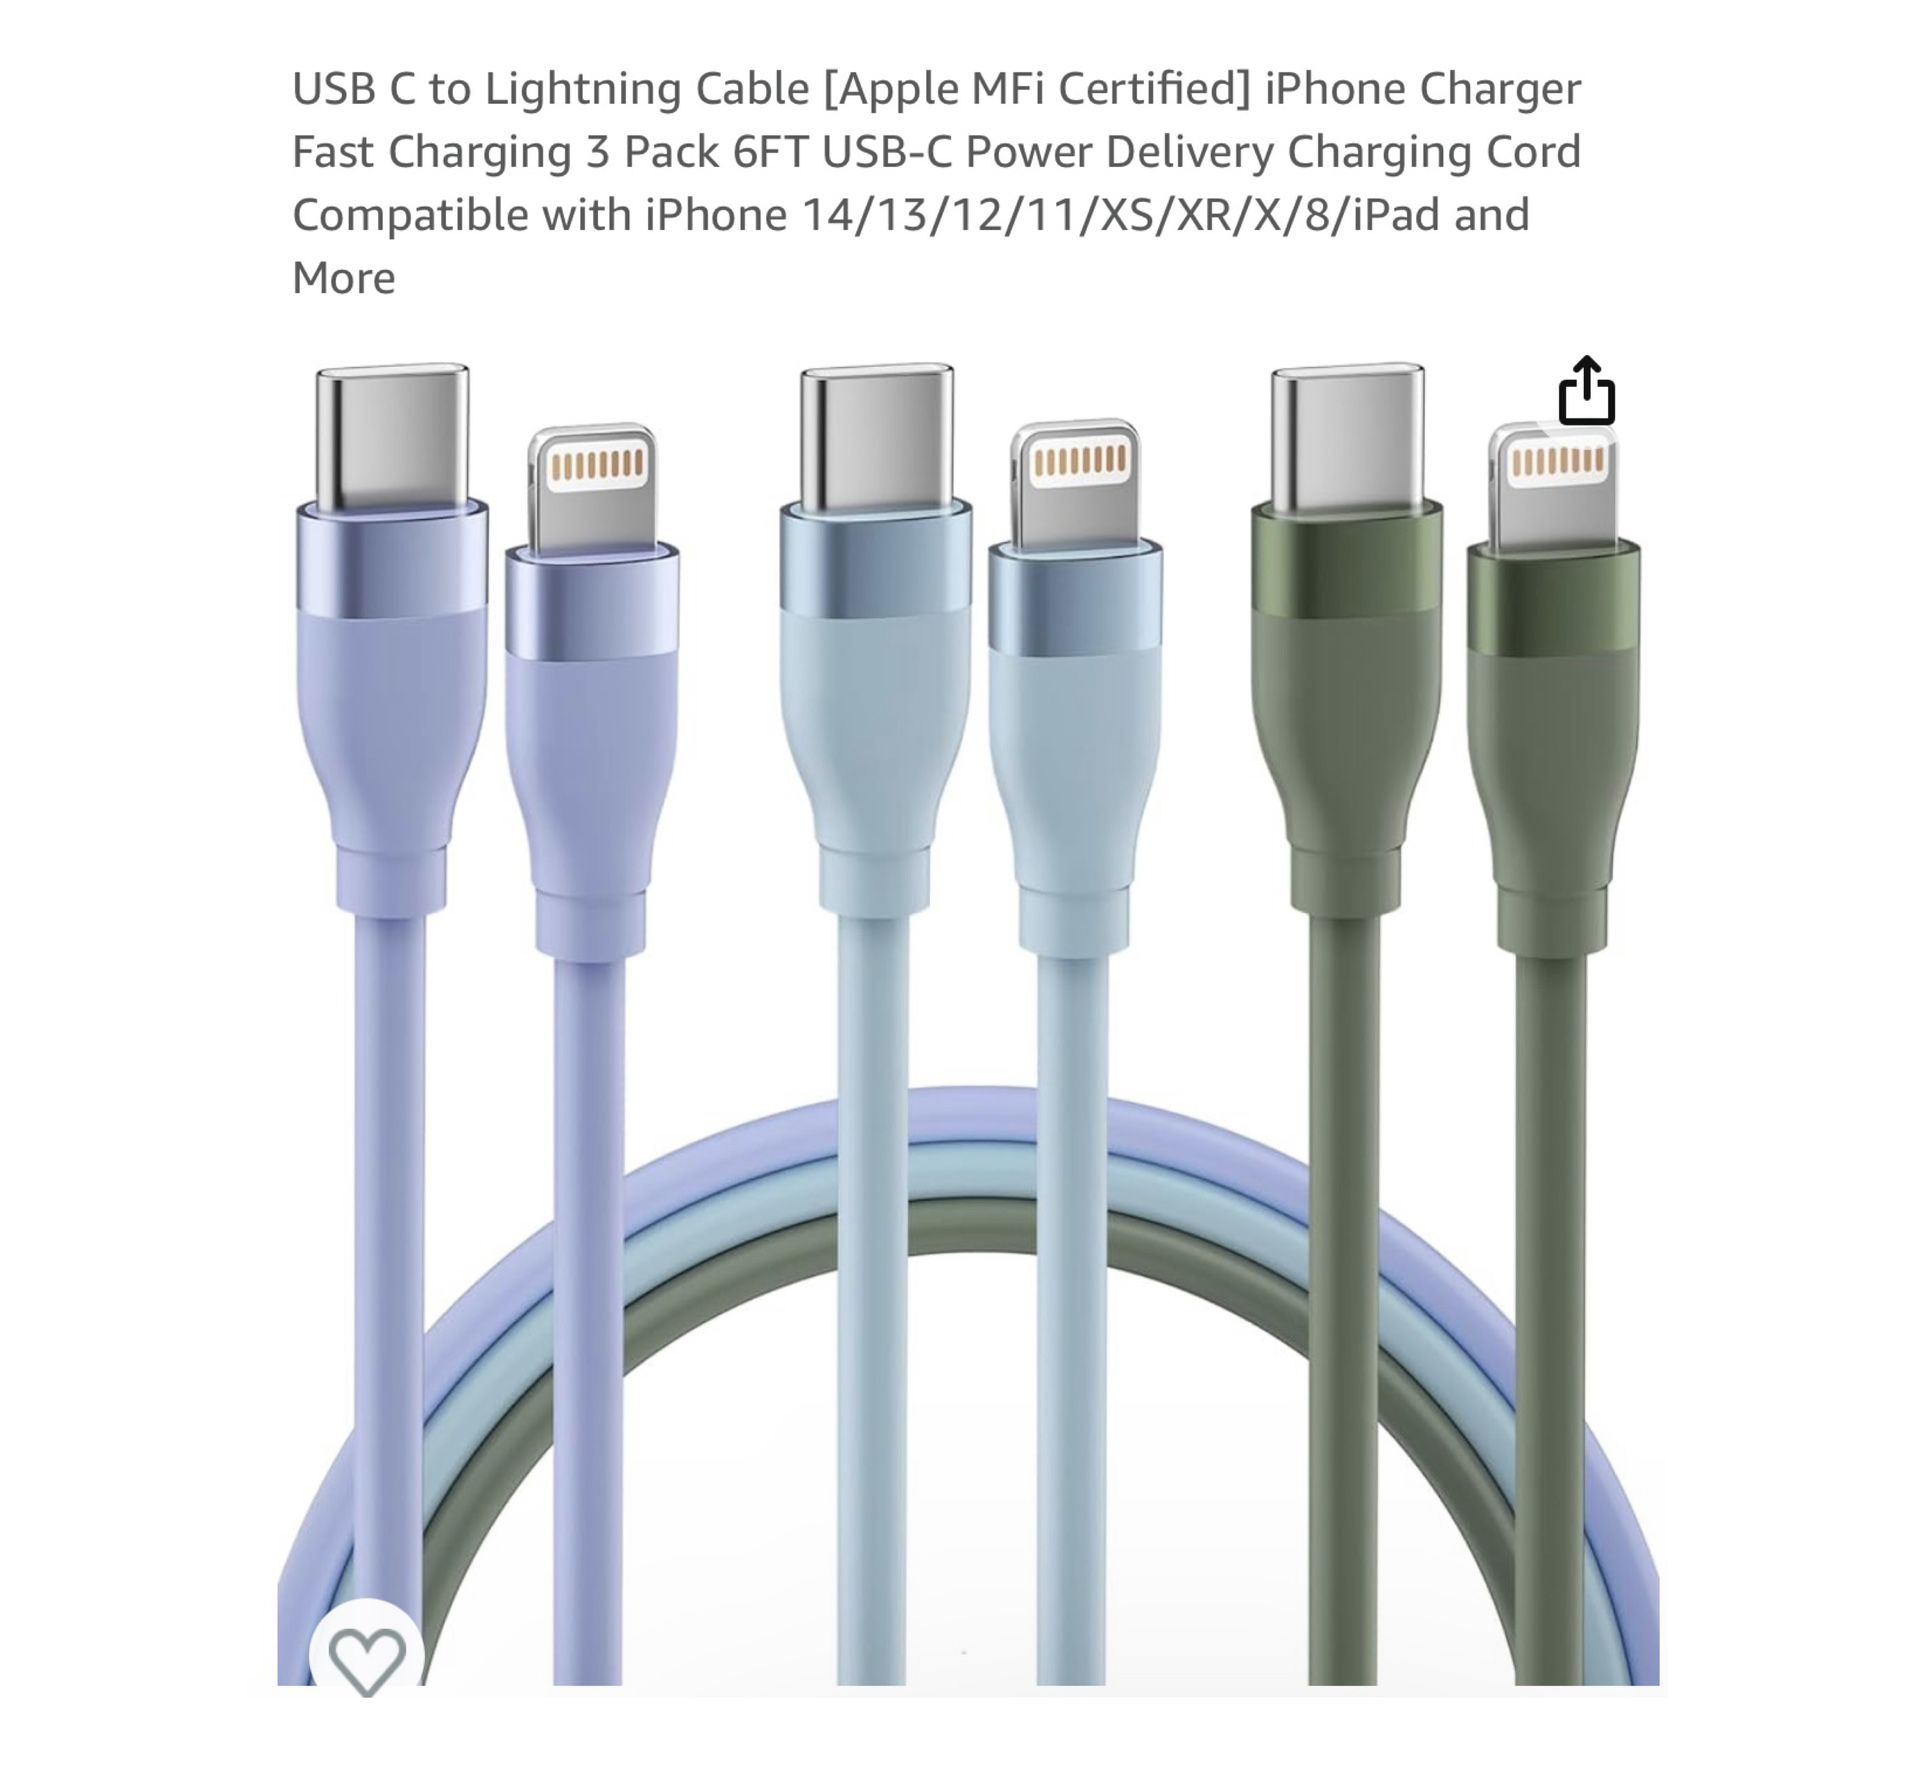 Brand new USB C to Lightning Cable [Apple MFi Certified] iPhone Charger Fast Charging 3 Pack 6FT USB-C Power Delivery Charging Cord Compatible with iP